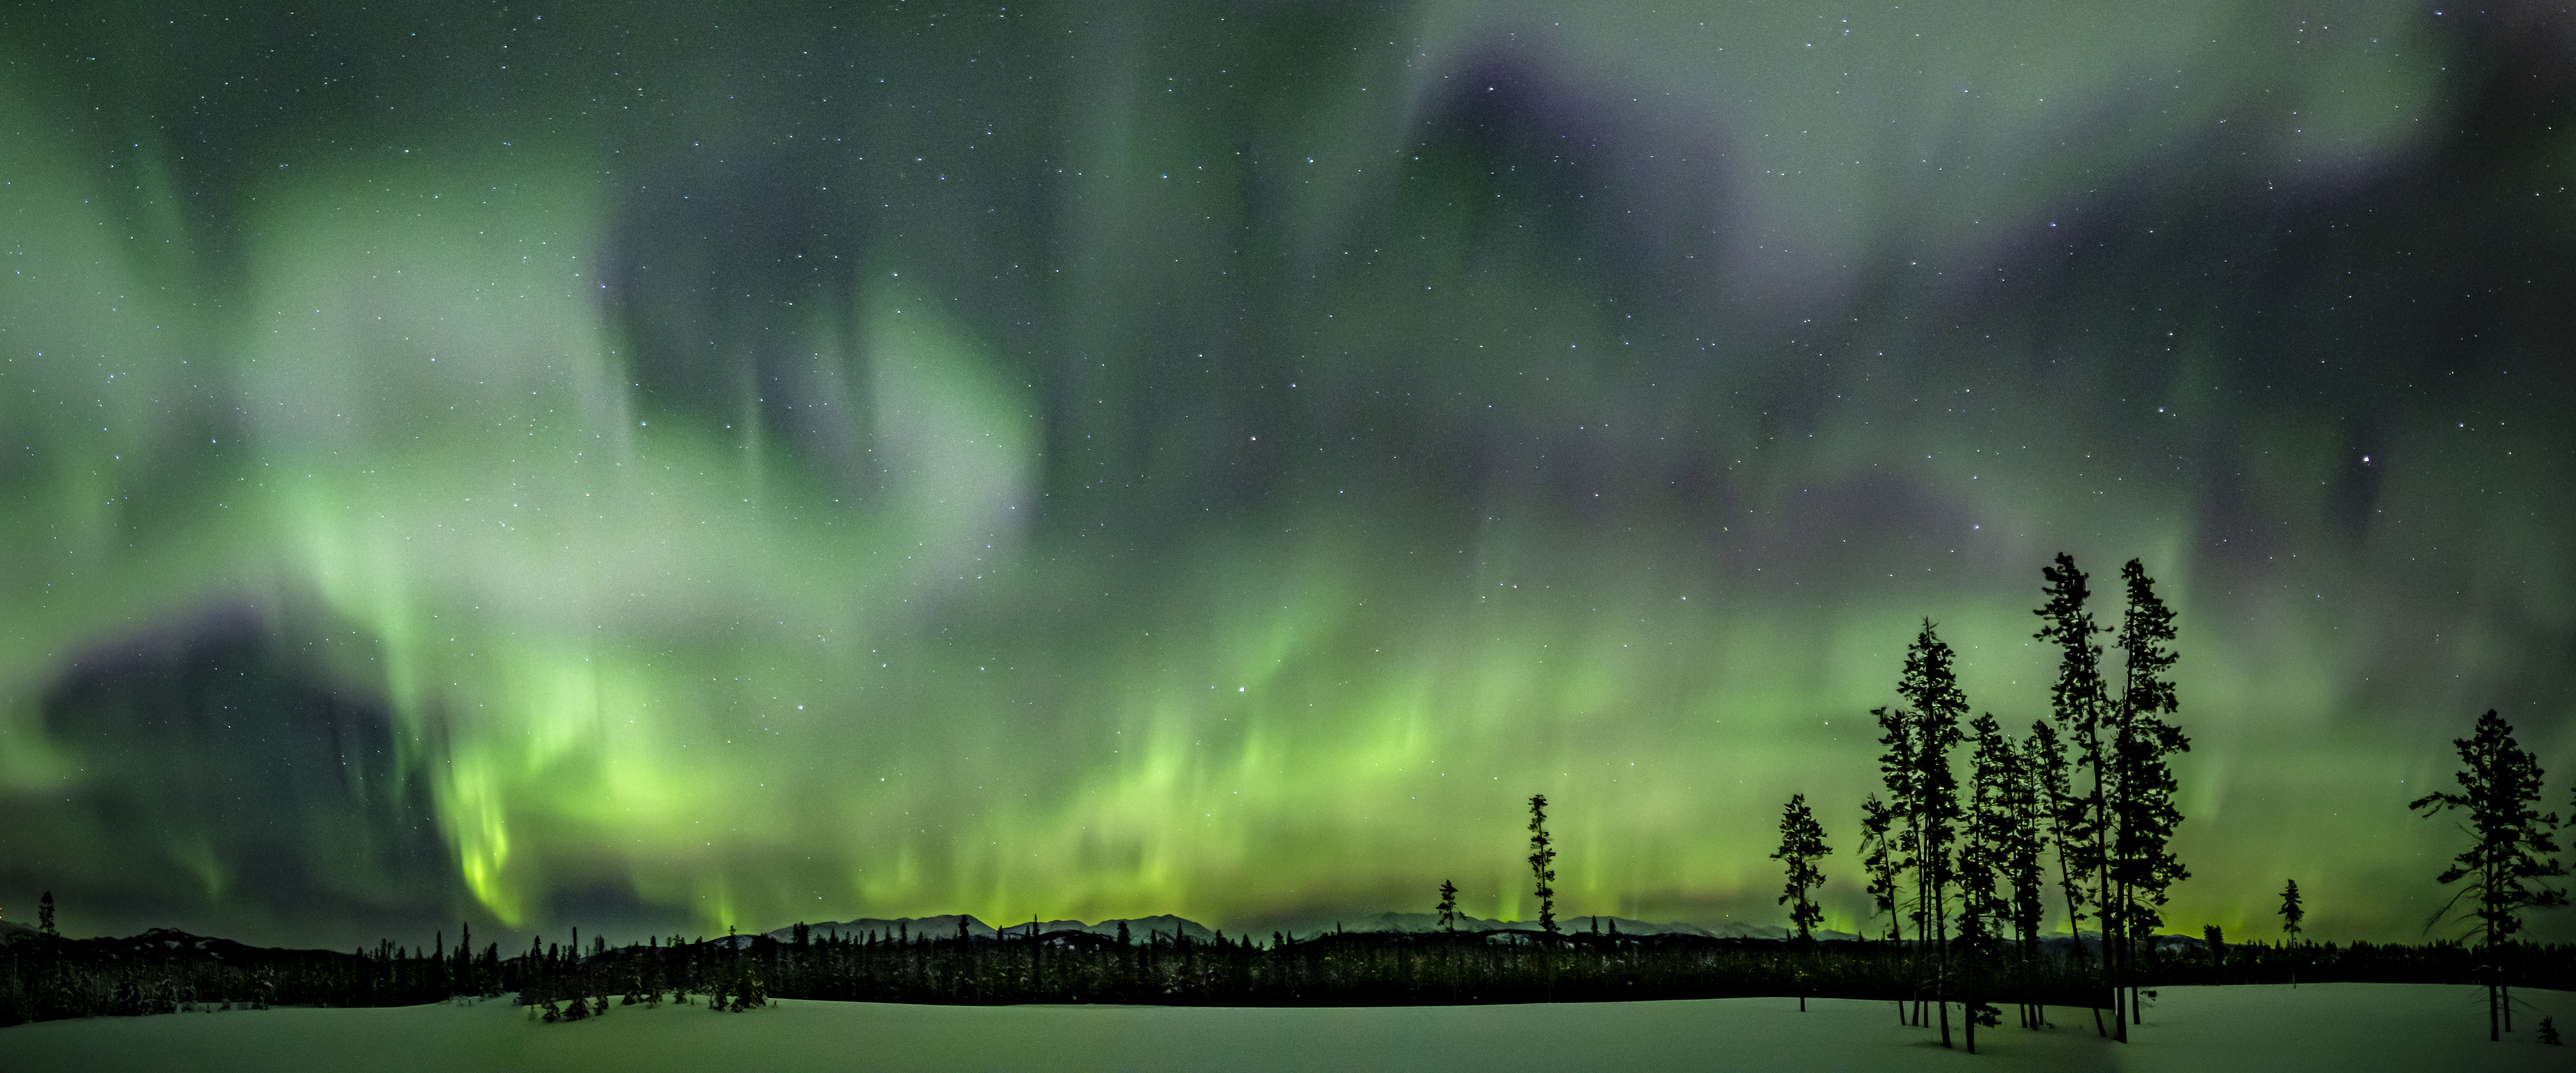 6 ways to see Northern Lights in the Canadian Arctic, aurora boreal